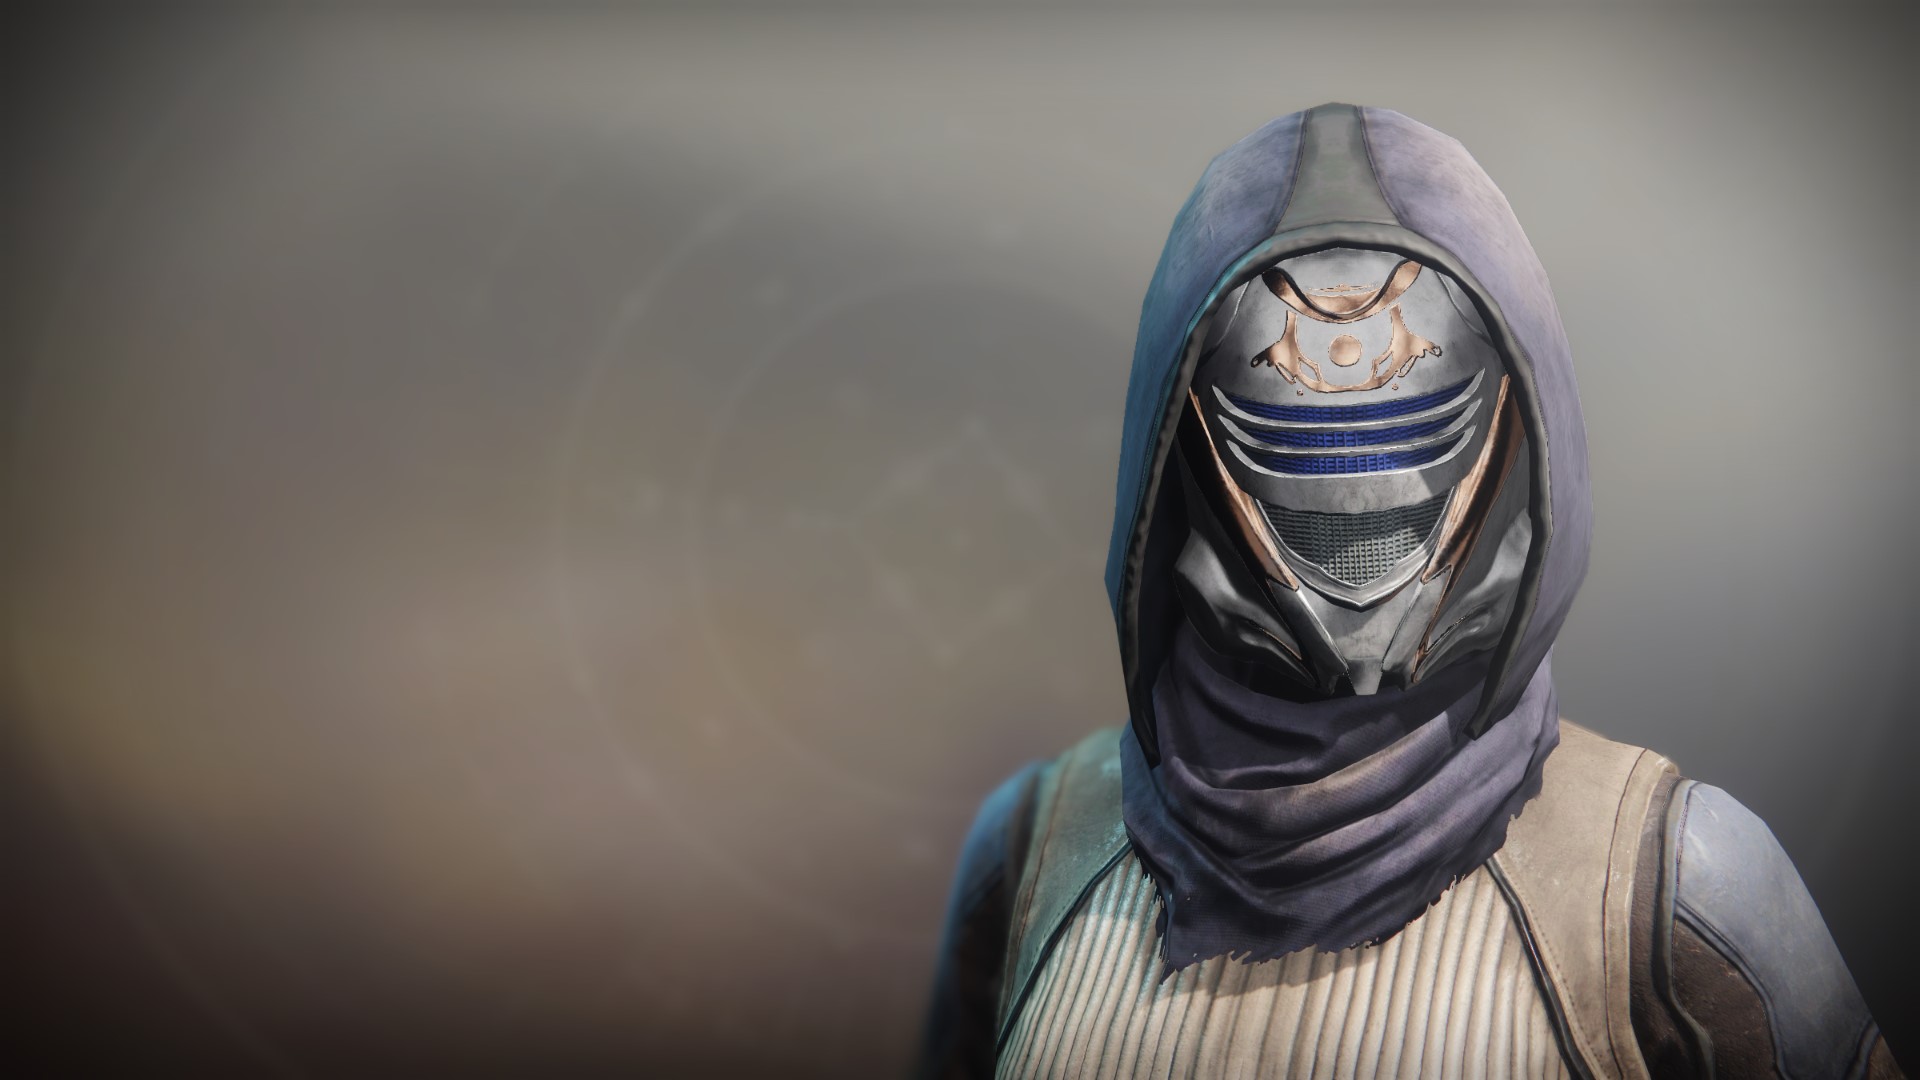 An in-game render of the Winterhart Mask.